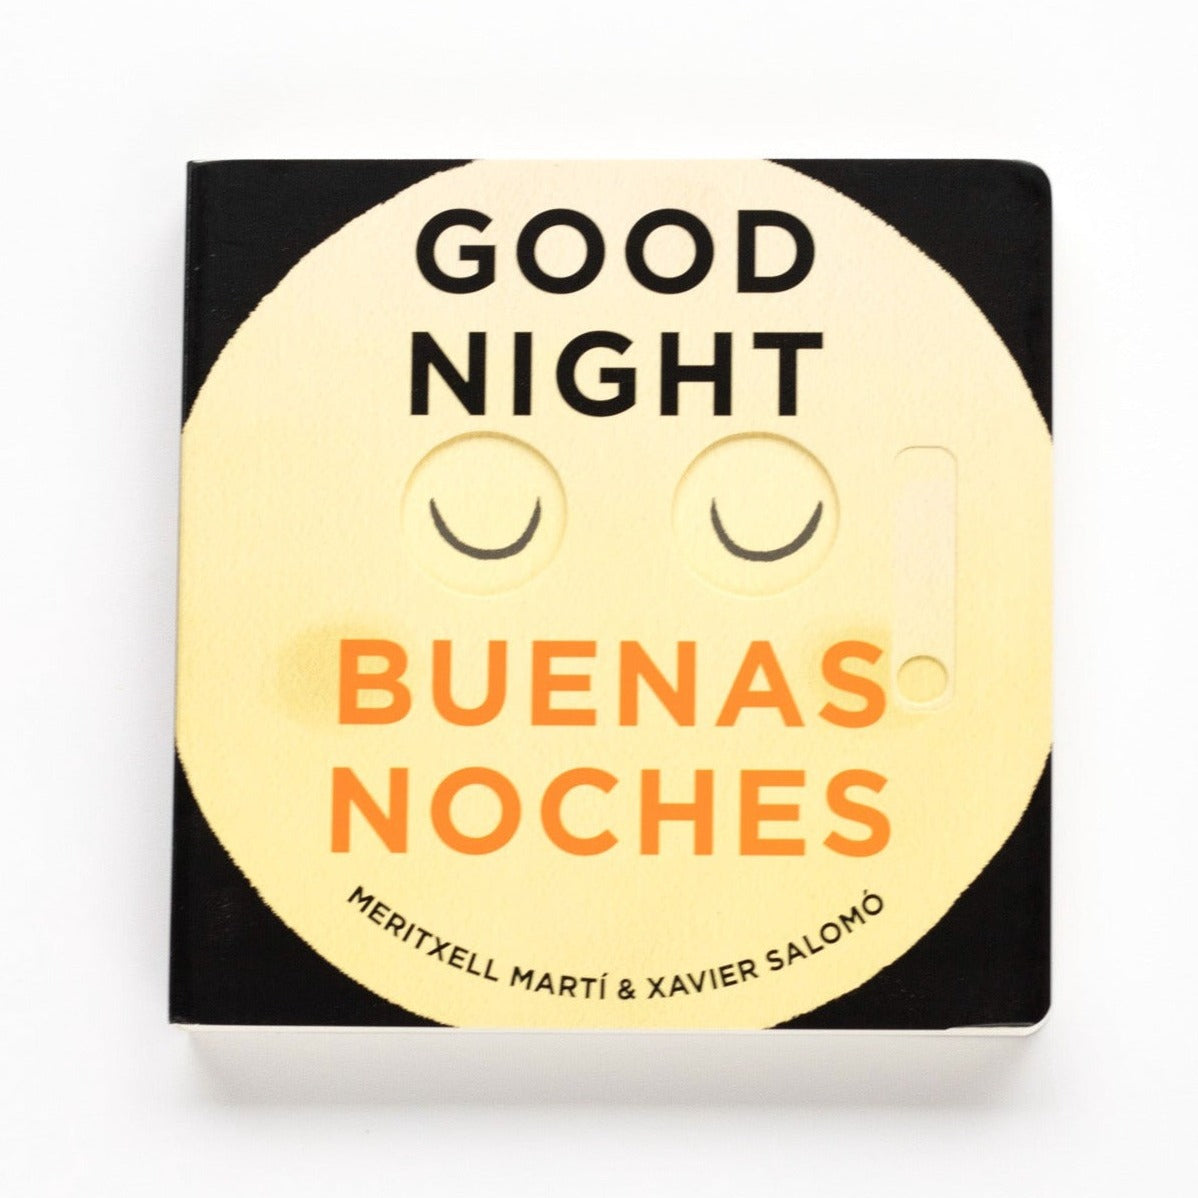 A black board book with yellow moon with closed eyes on front. Text on book reads, &quot;Good Night Buenas Noches Meritxell Marti &amp; Xavier Salomo&quot;. Photographed on white background.